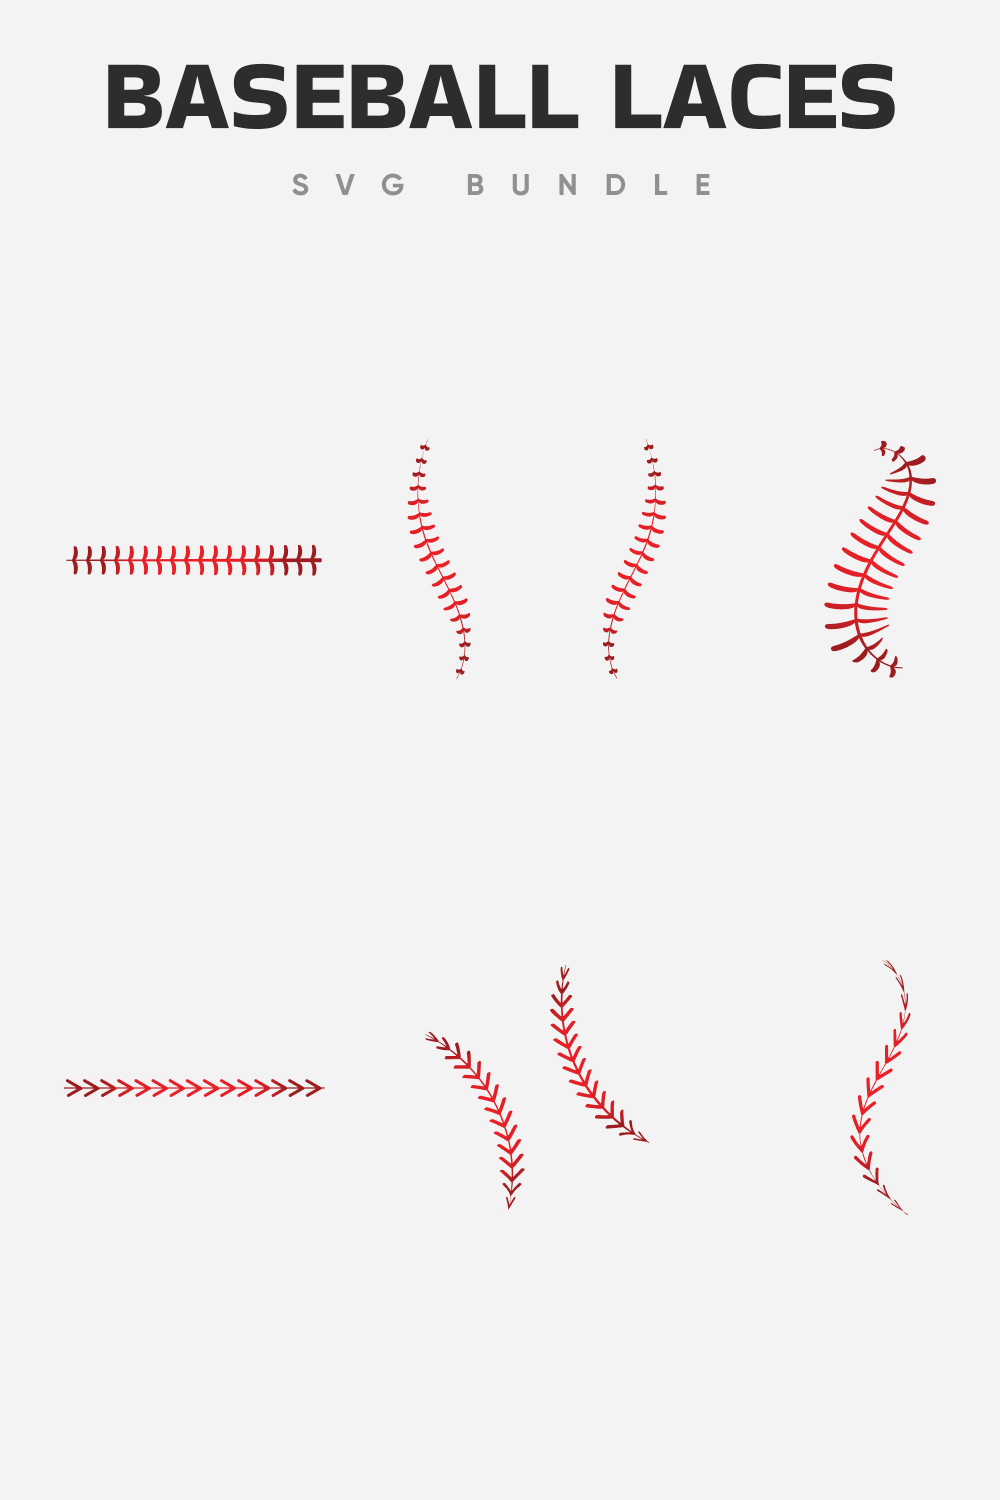 Drawings of baseball laces in different shapes for Pinterest.